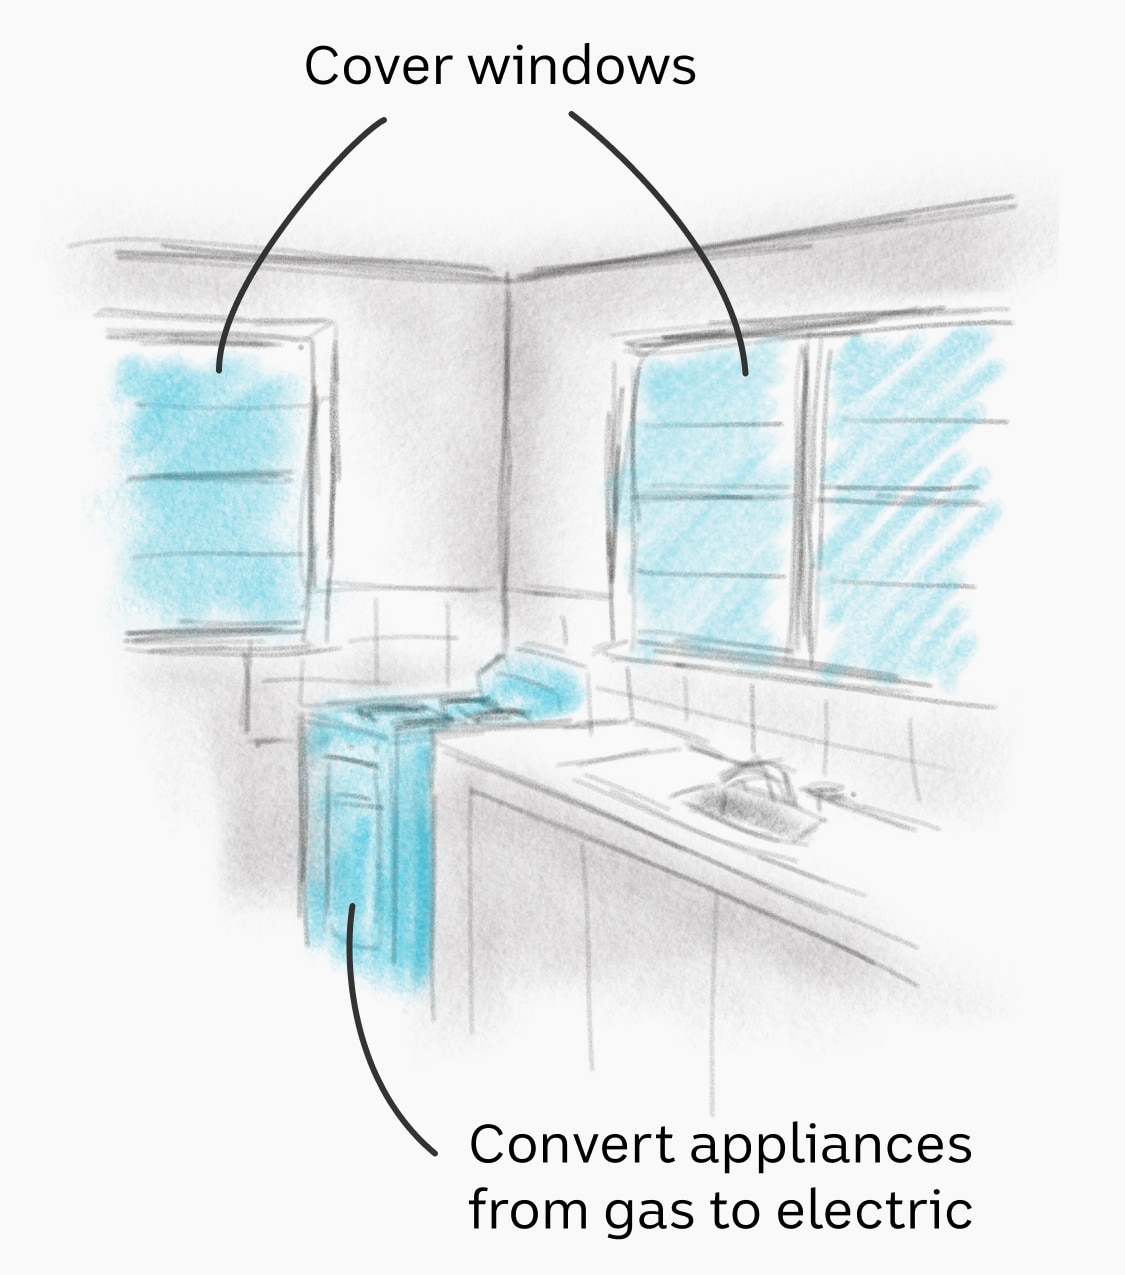 An illustration shows the corner of a kitchen with oven and windows highlighted in blue. Labels point to each area